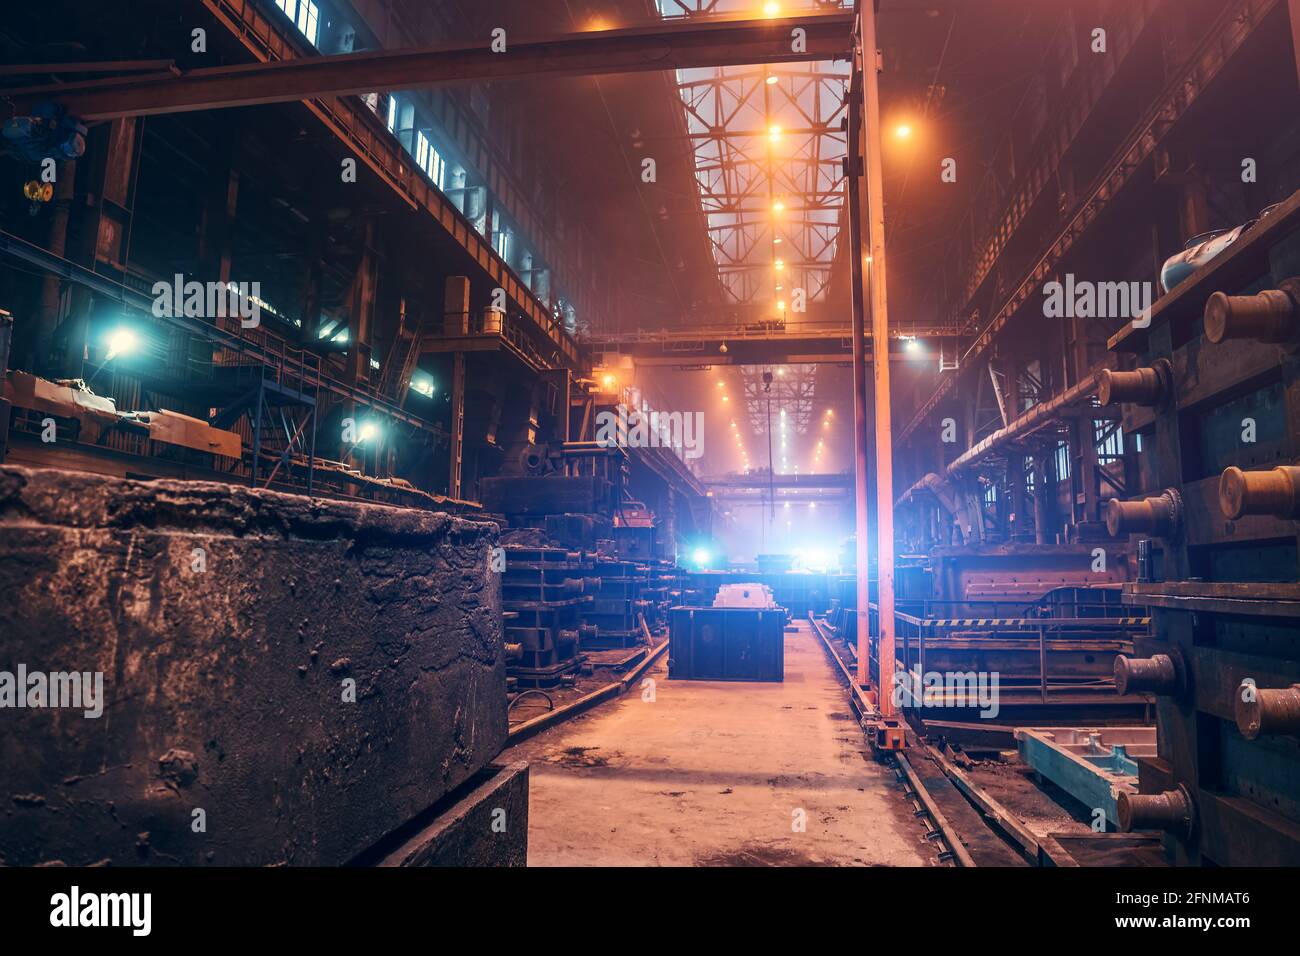 Factory interior. Heavy metallurgy industry. Foundry workshop. Steel Mill industrial plant. Metal manufacture. Large industrial building inside with metalwork equipment. Stock Photo